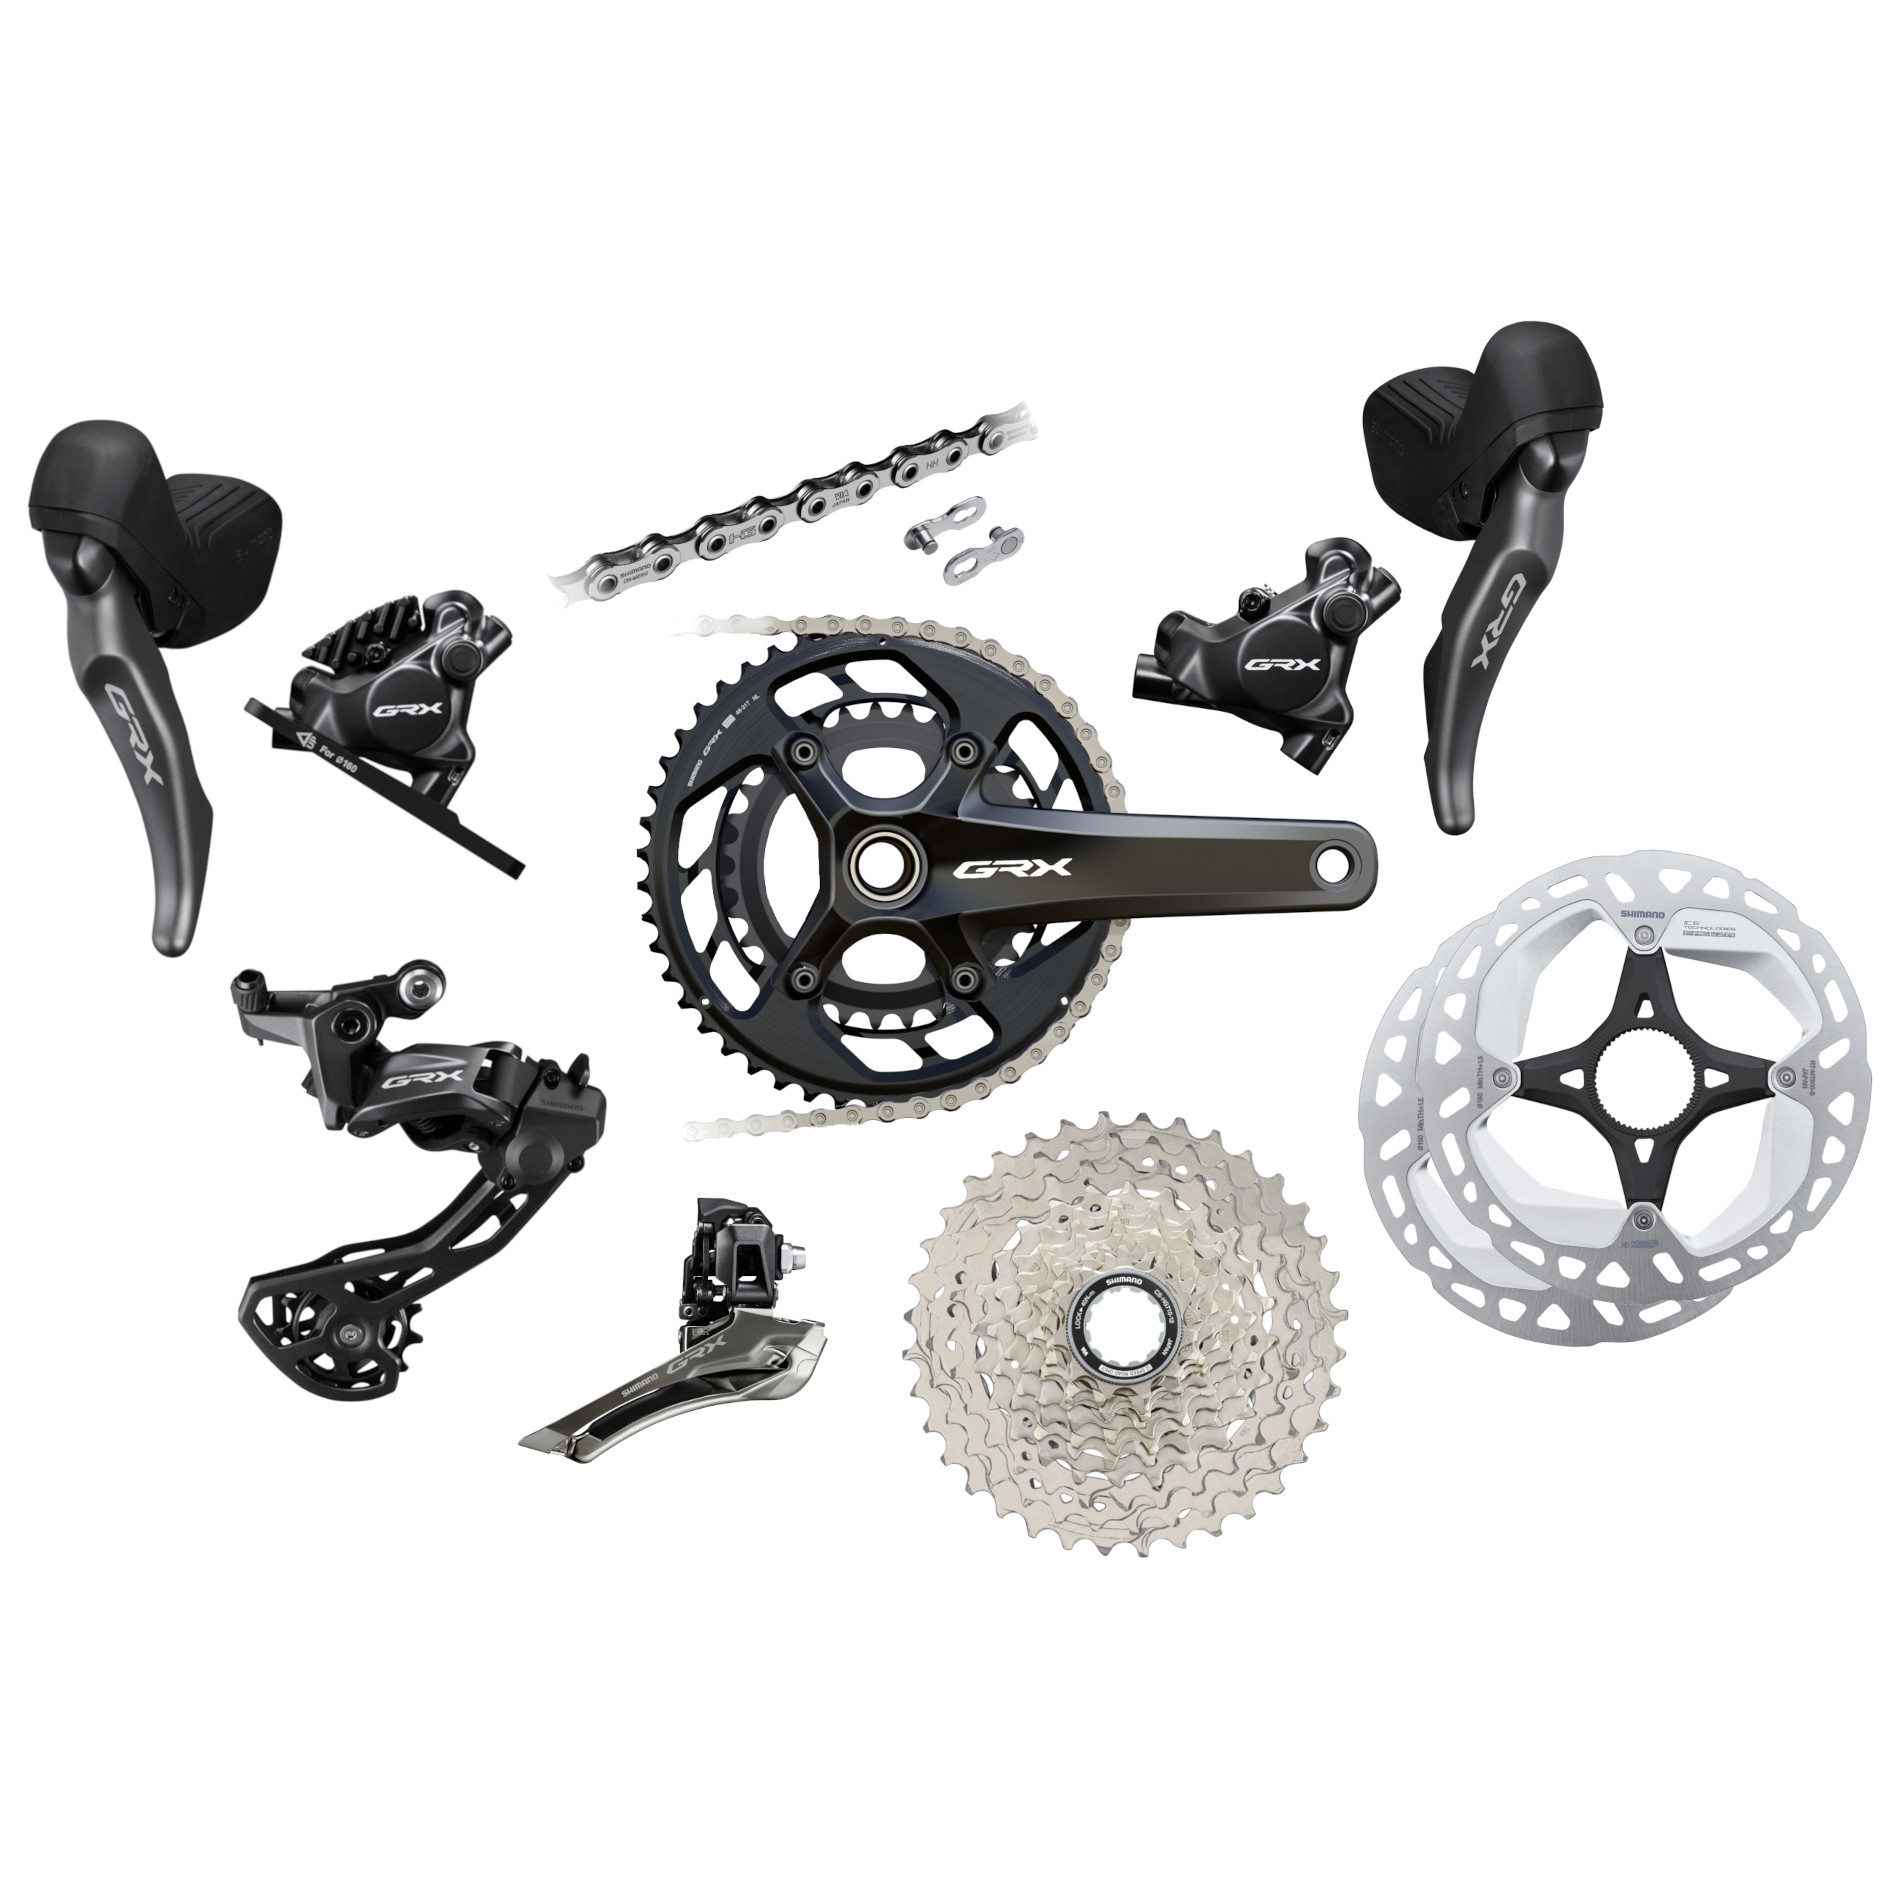 Picture of Shimano GRX RX820 Groupset - 2x12-speed | with CS-R8100 Cassette (11-34T)